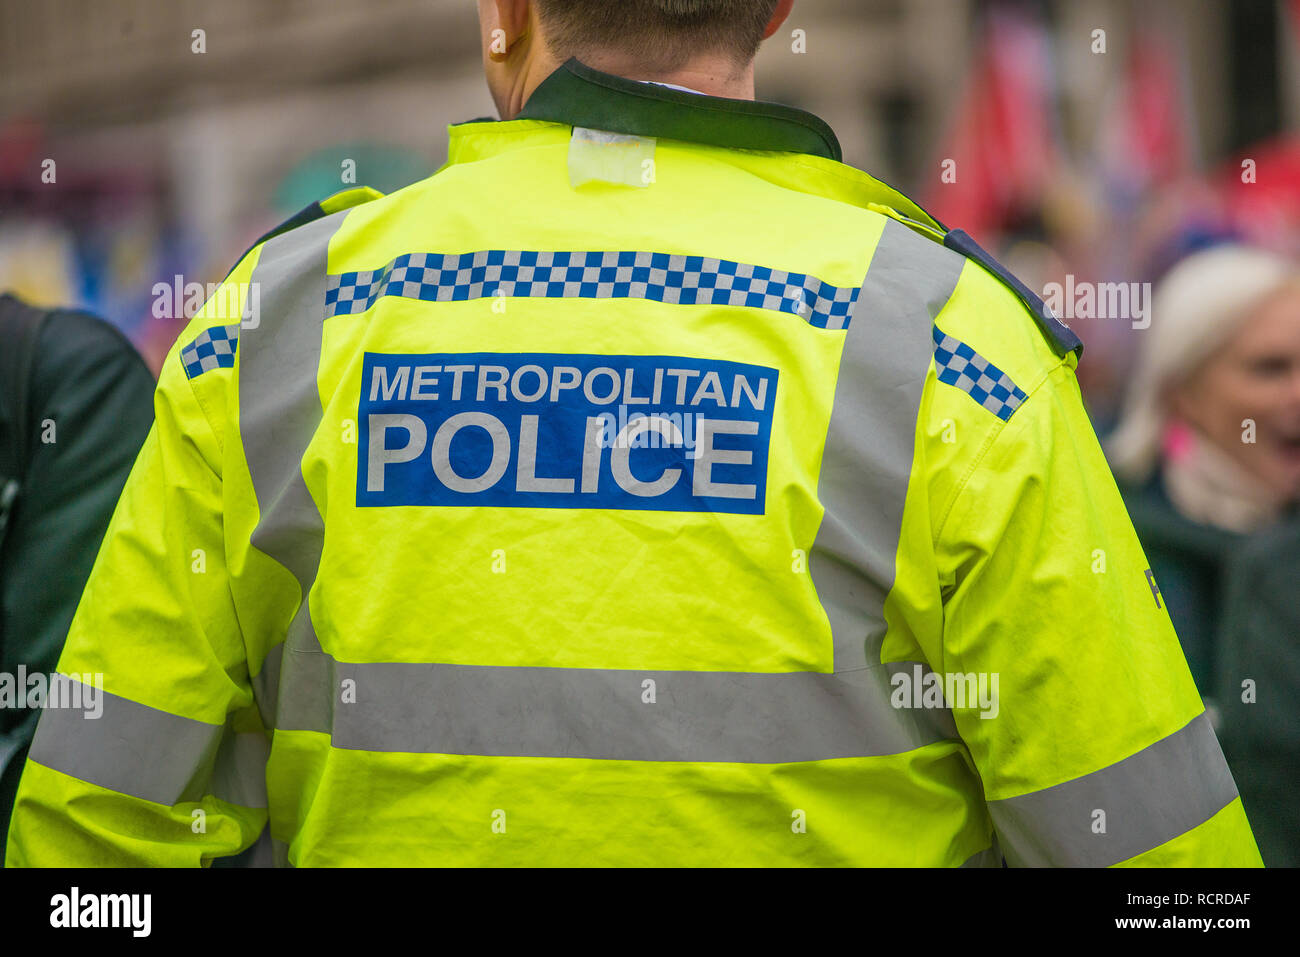 Metropolitan Police sign on the back of a high visibility jacket worn by police officers escorting a street demonstration through central London, UK. Stock Photo